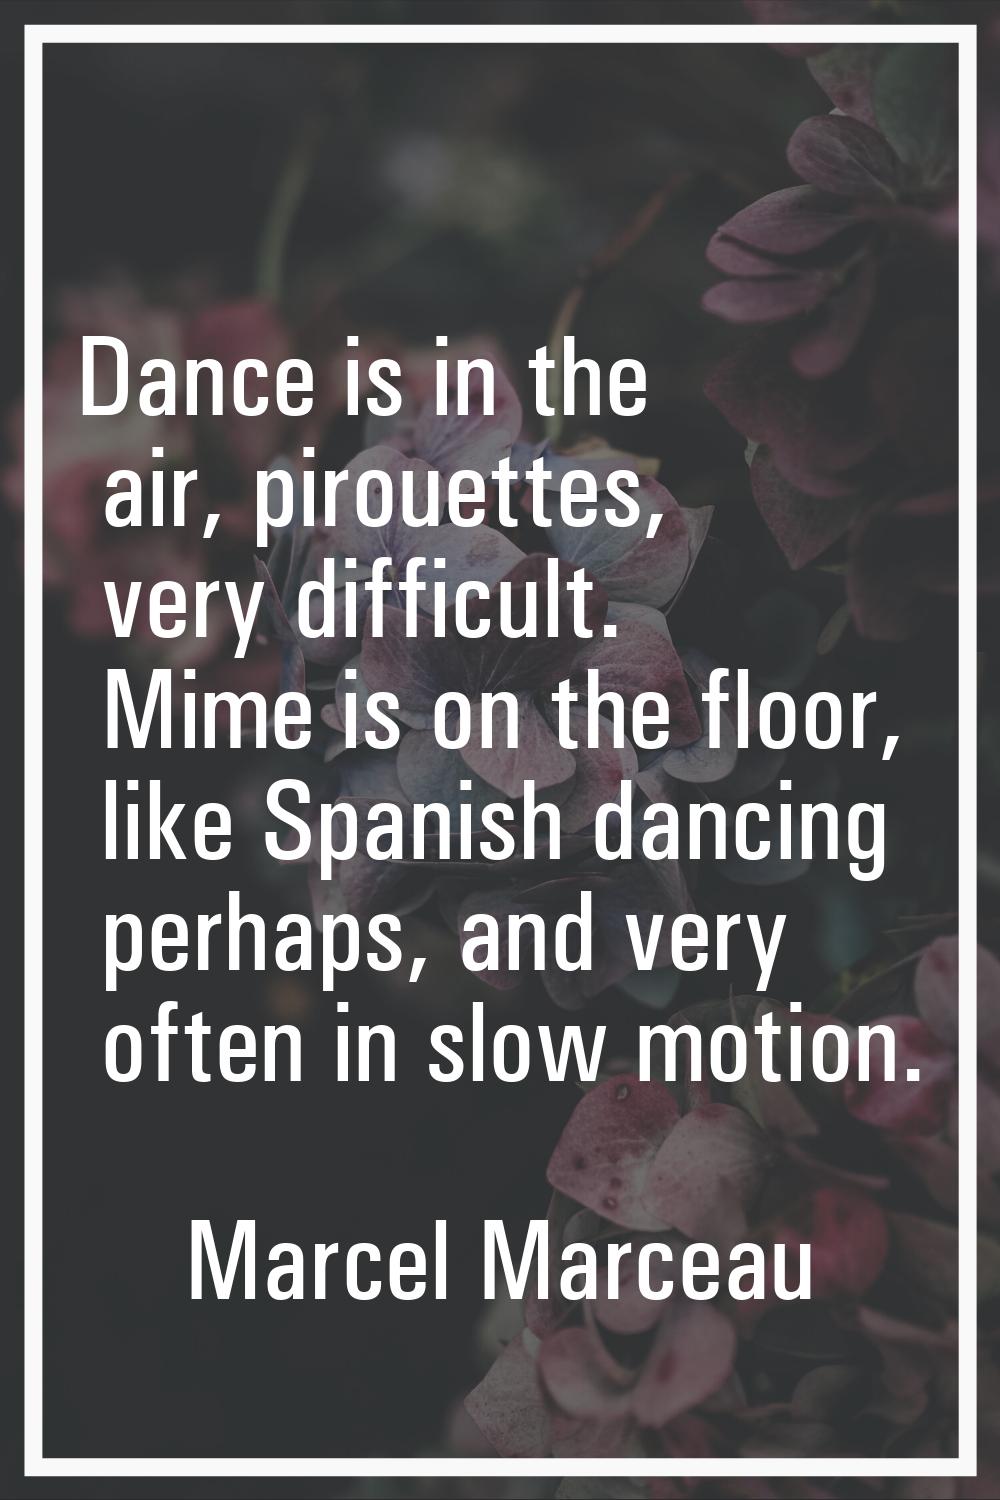 Dance is in the air, pirouettes, very difficult. Mime is on the floor, like Spanish dancing perhaps